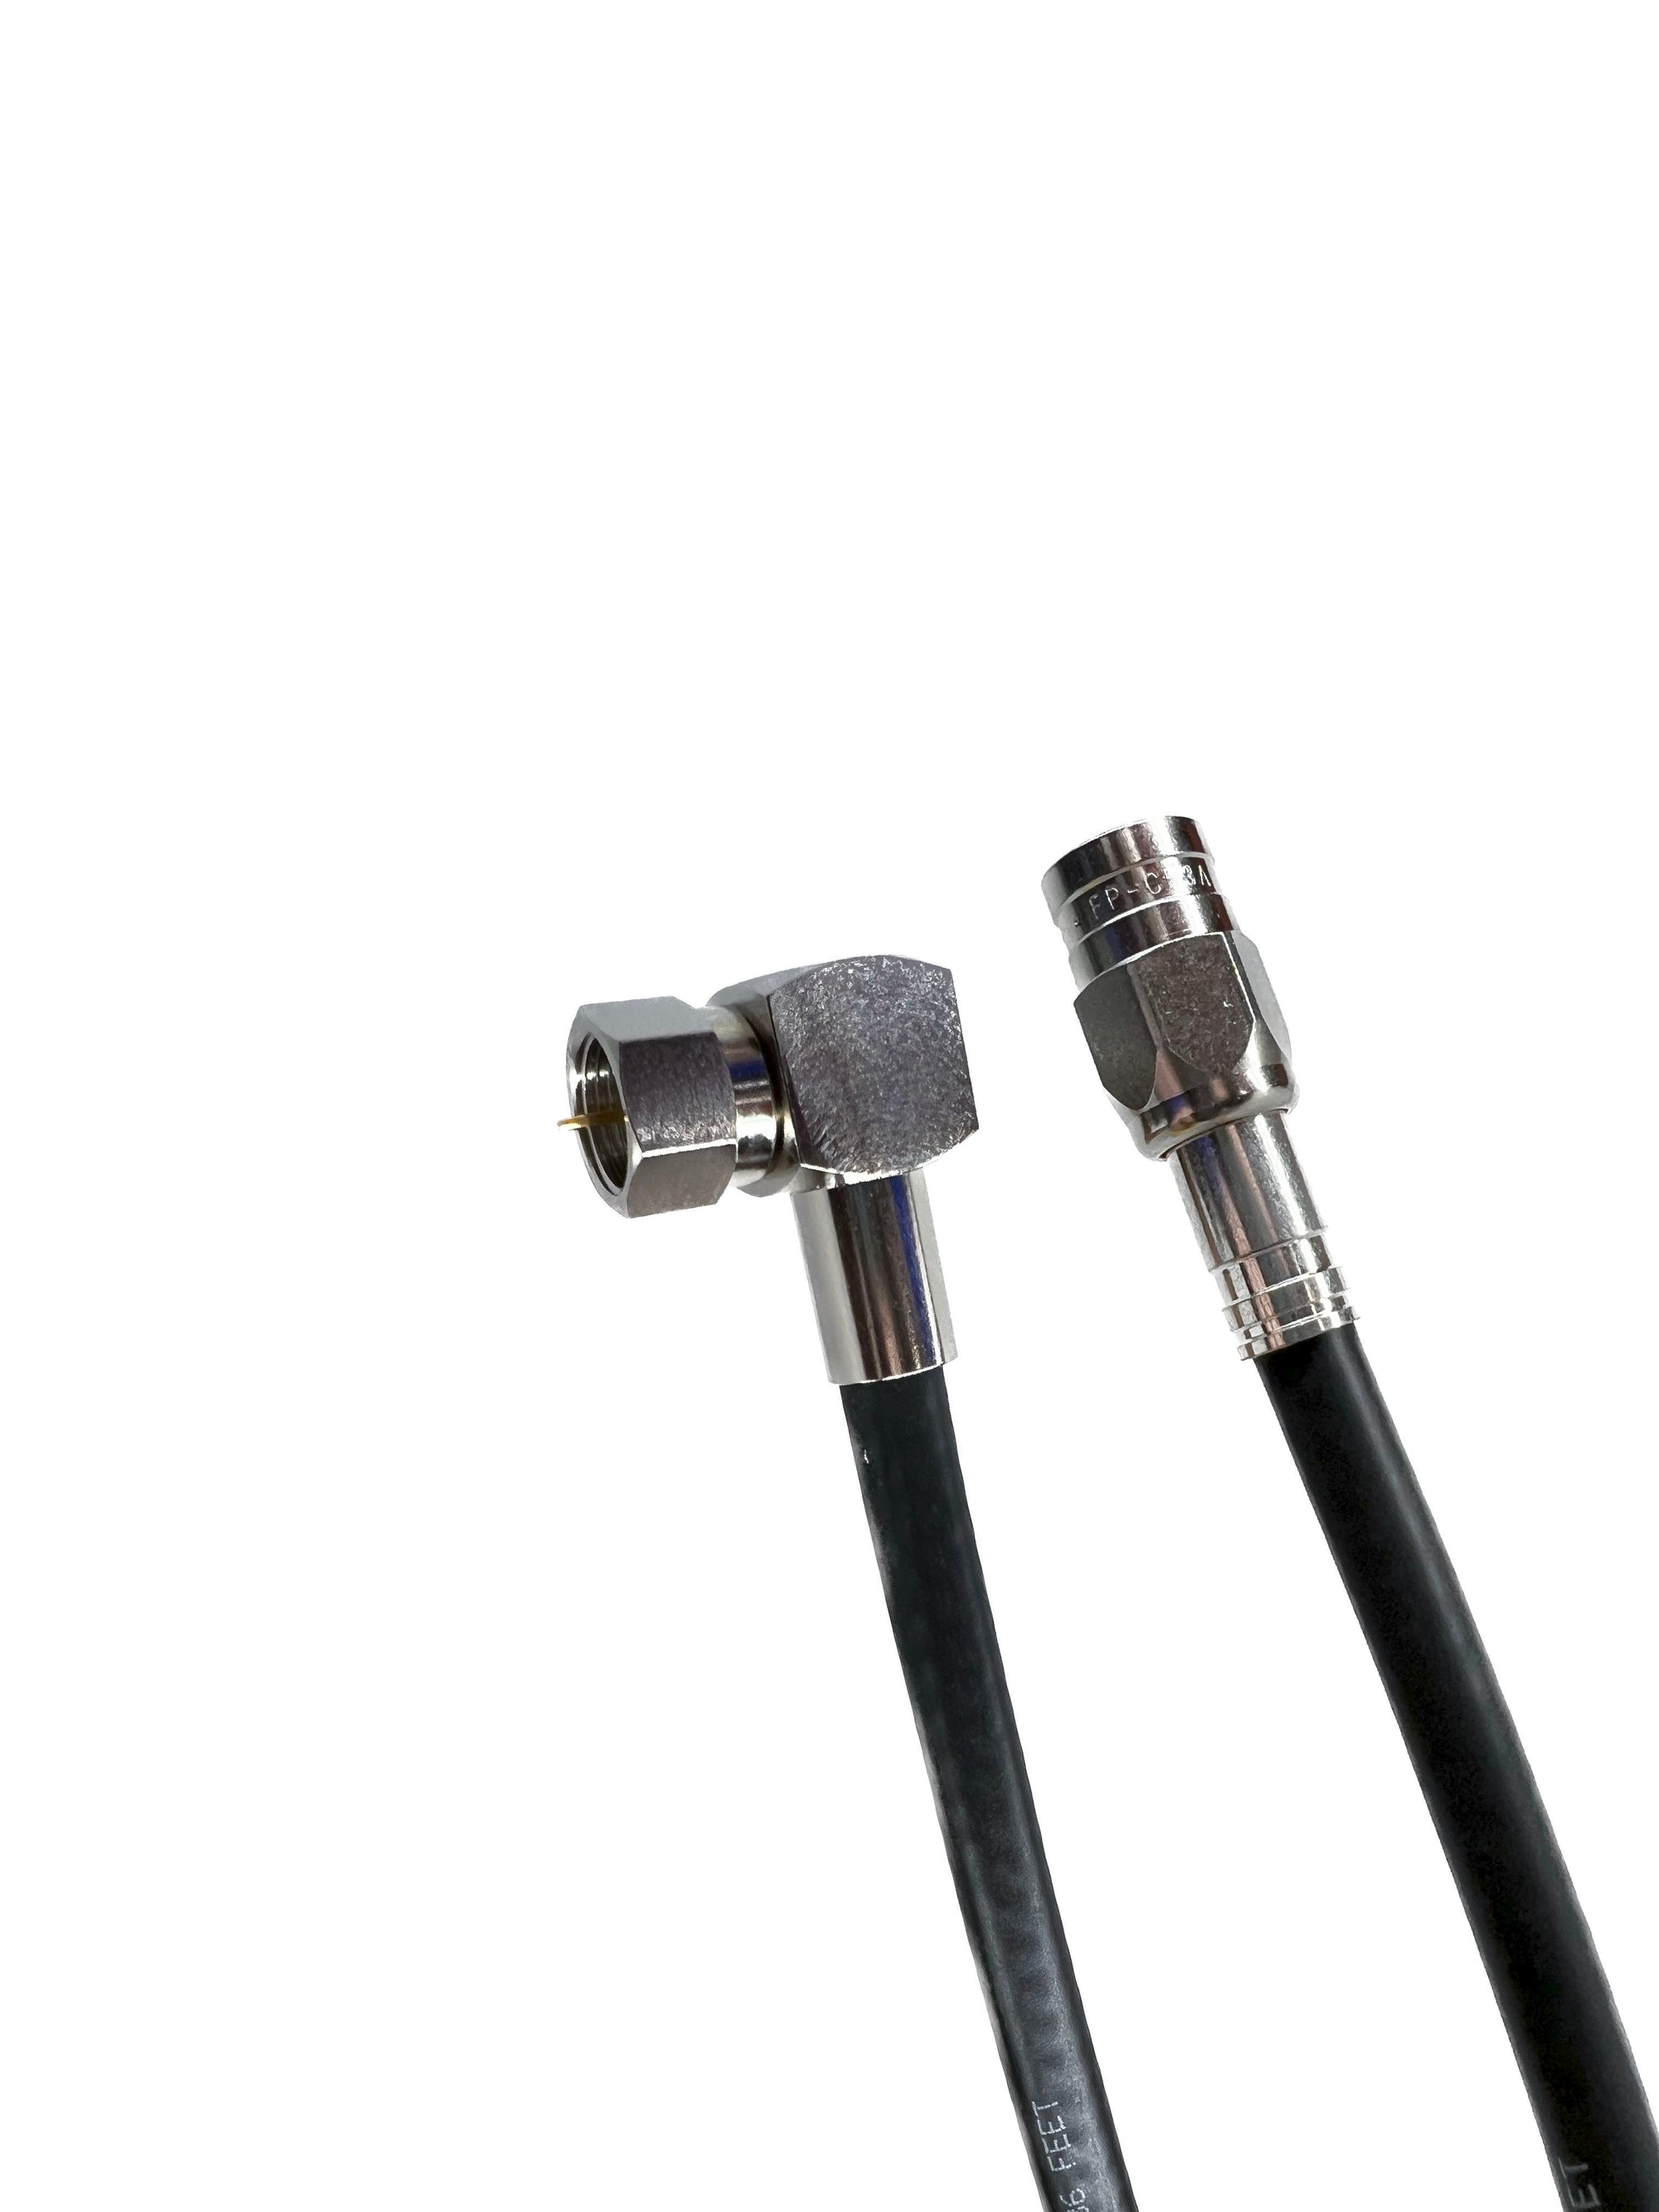 Digital Coaxial Audio Video Cable – 15 feet (Satellite Cable Connectors,  Male F Connector Pin, Coax 